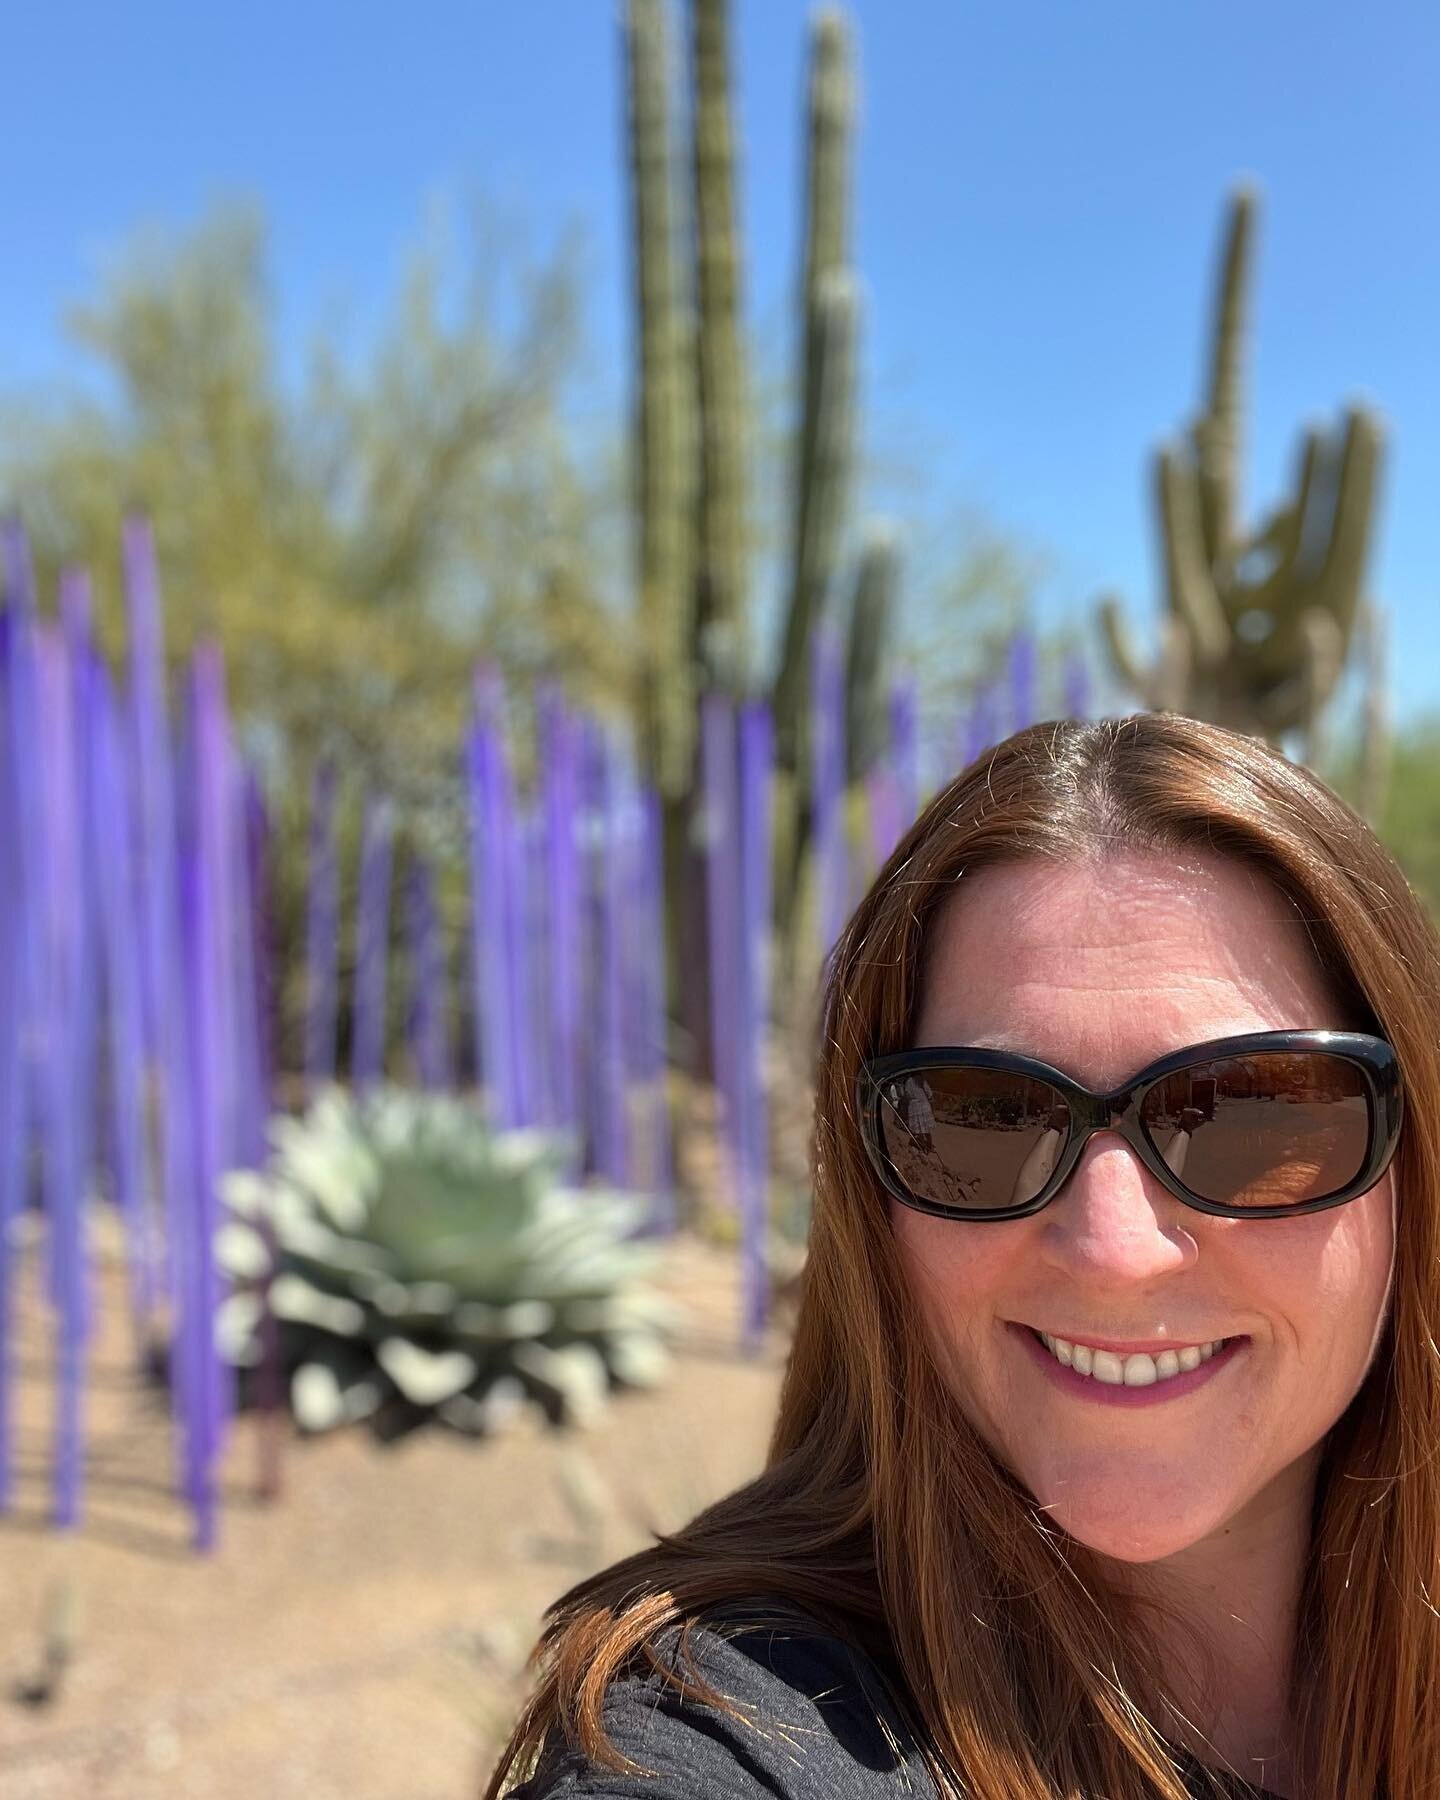 Amazing contrast of nature and art 🌵
#chihulyglass